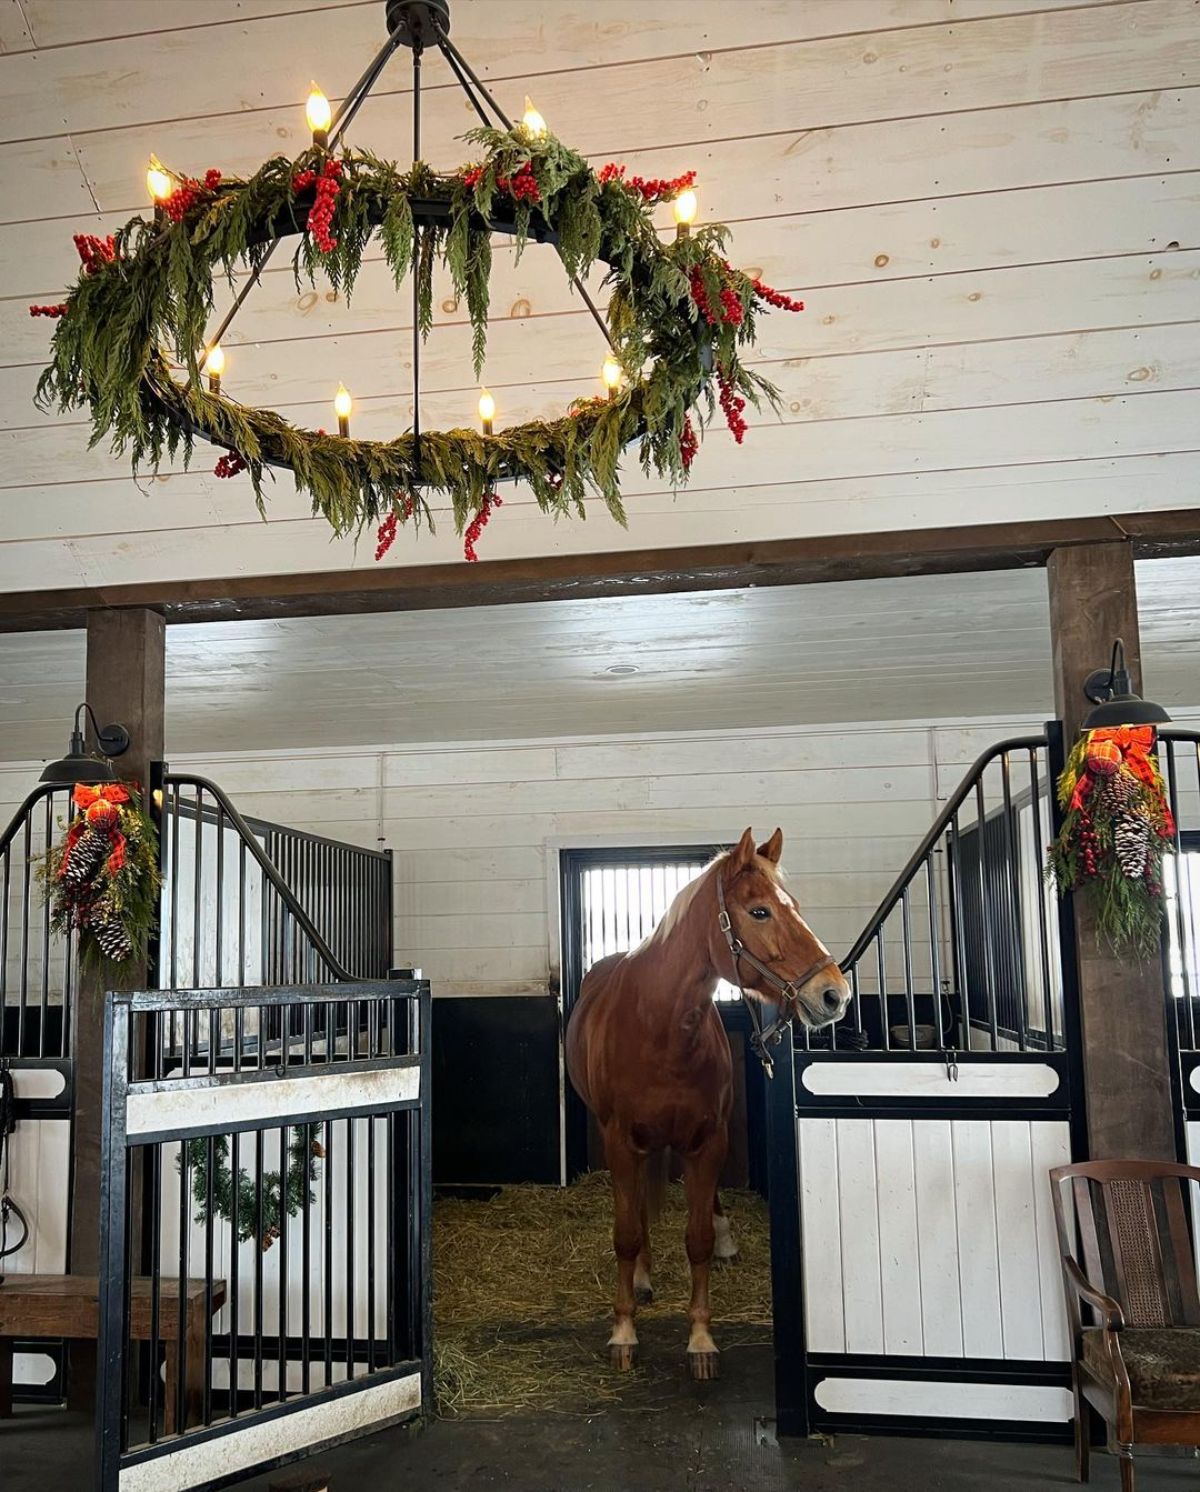 A horse stall with a brown horse and a holiday decor.